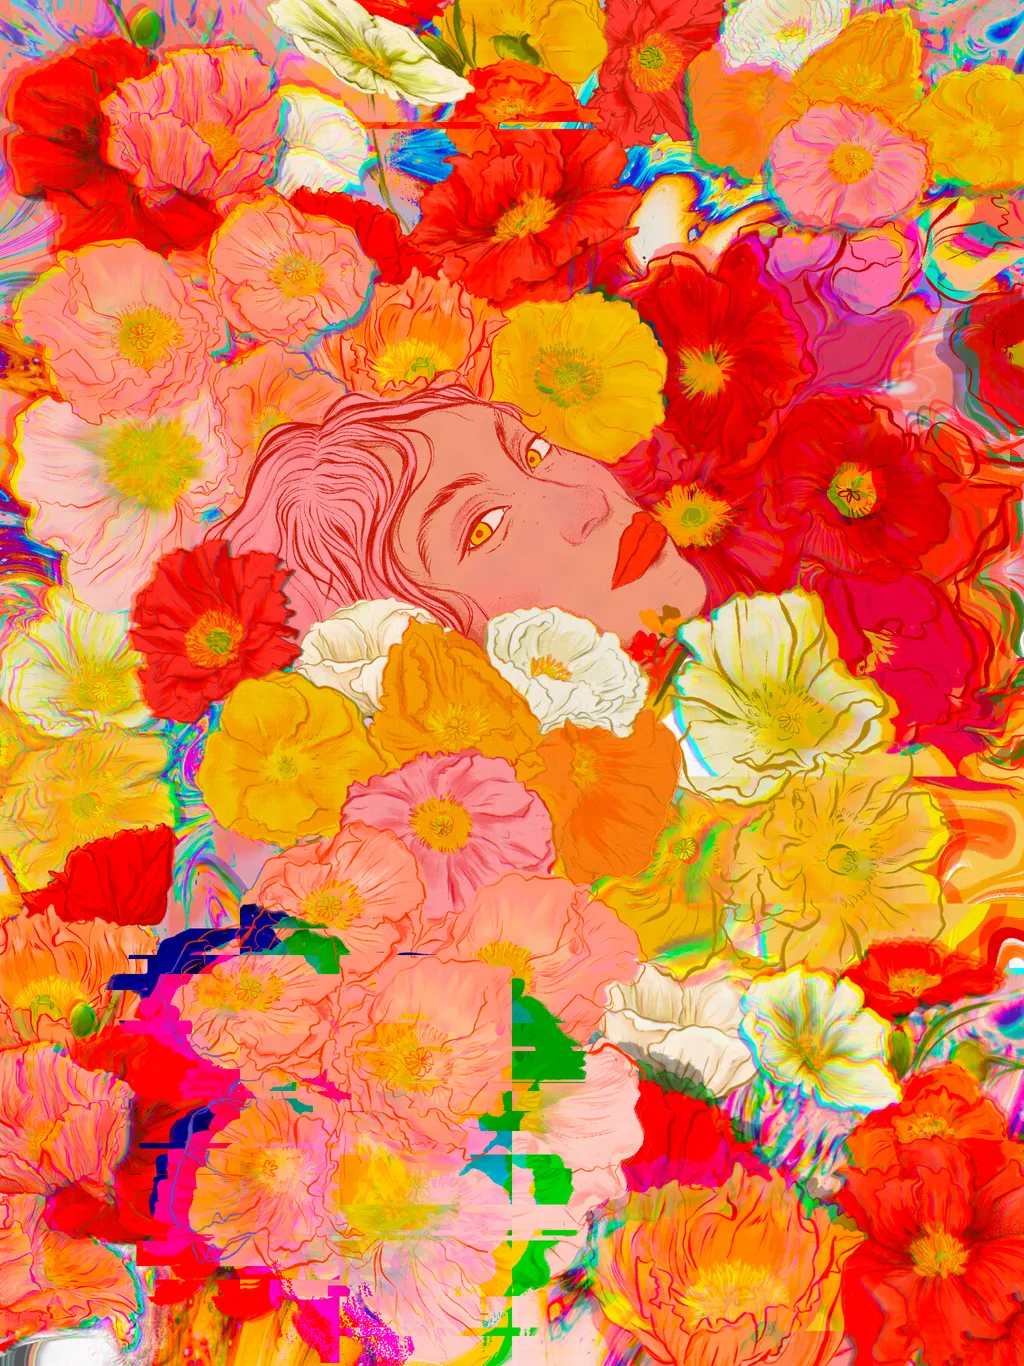 a vividly-colored digital illustration depicting a woman's face peeking from between a multitude of poppies; some of the flowers appear to glitch and distort